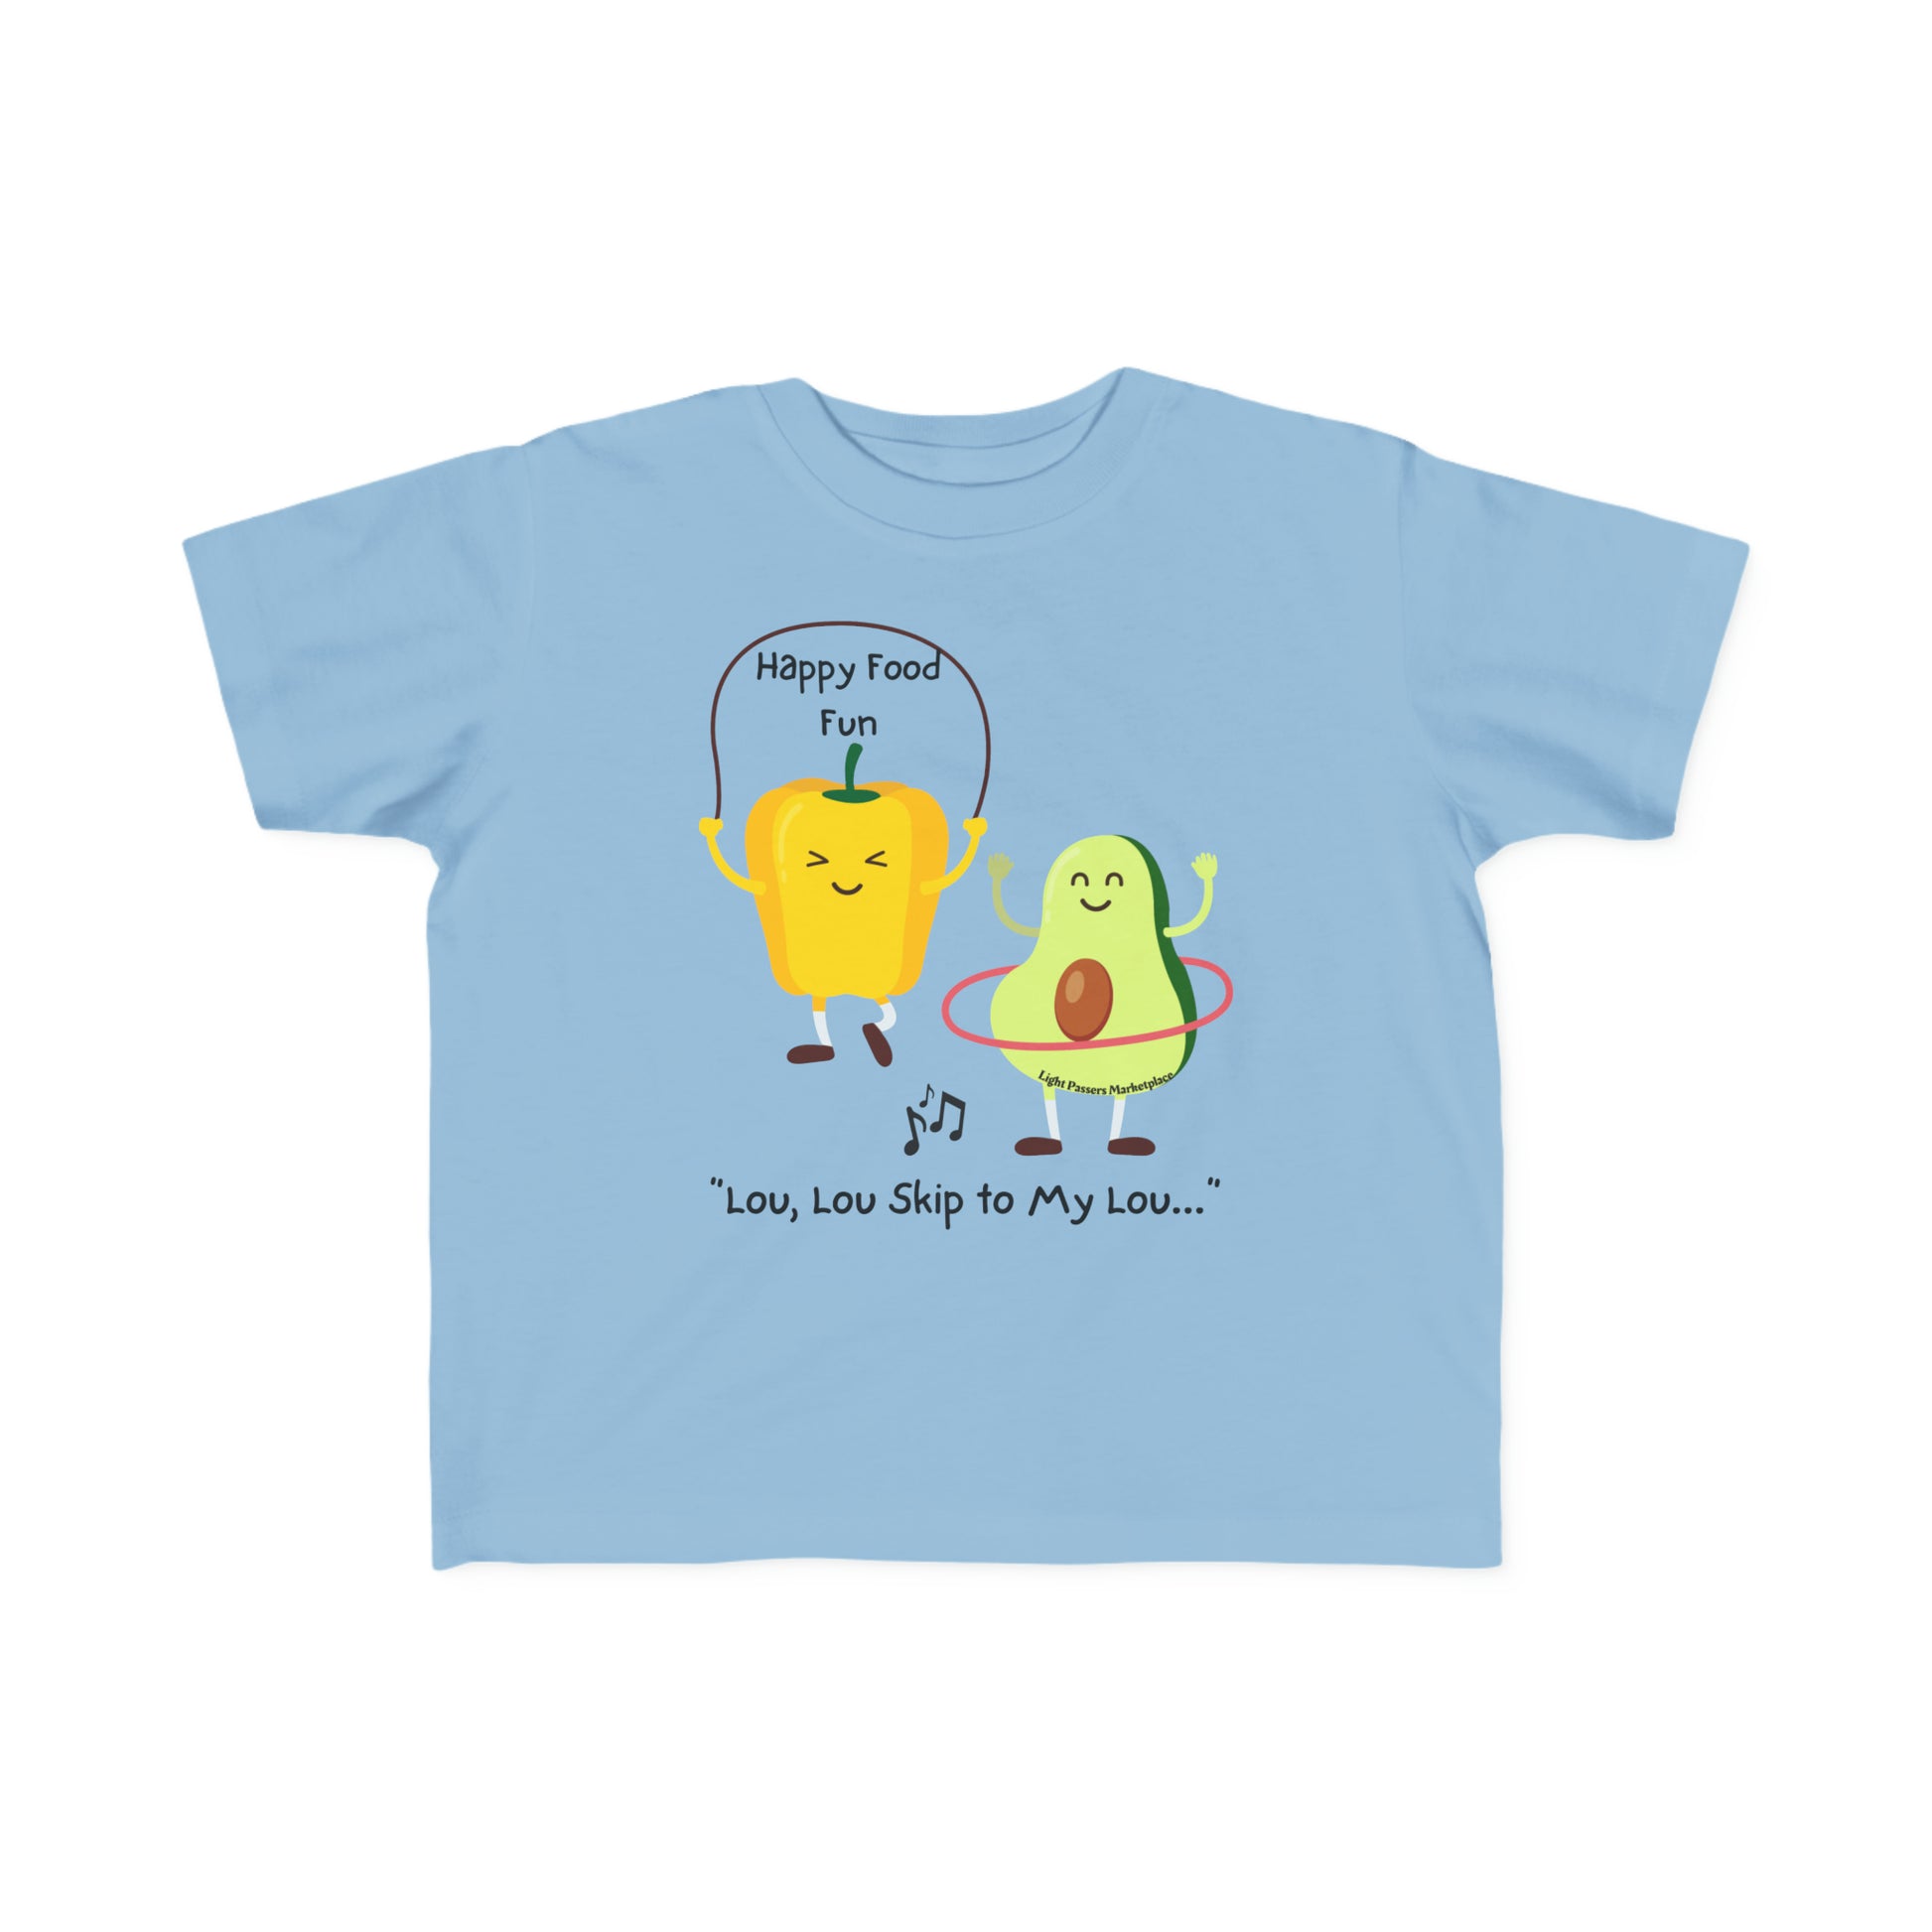 A Skip To My Lou Toddler T-shirt featuring cartoon food characters on a blue shirt. Made of soft 100% combed cotton, with a durable print, perfect for sensitive skin.